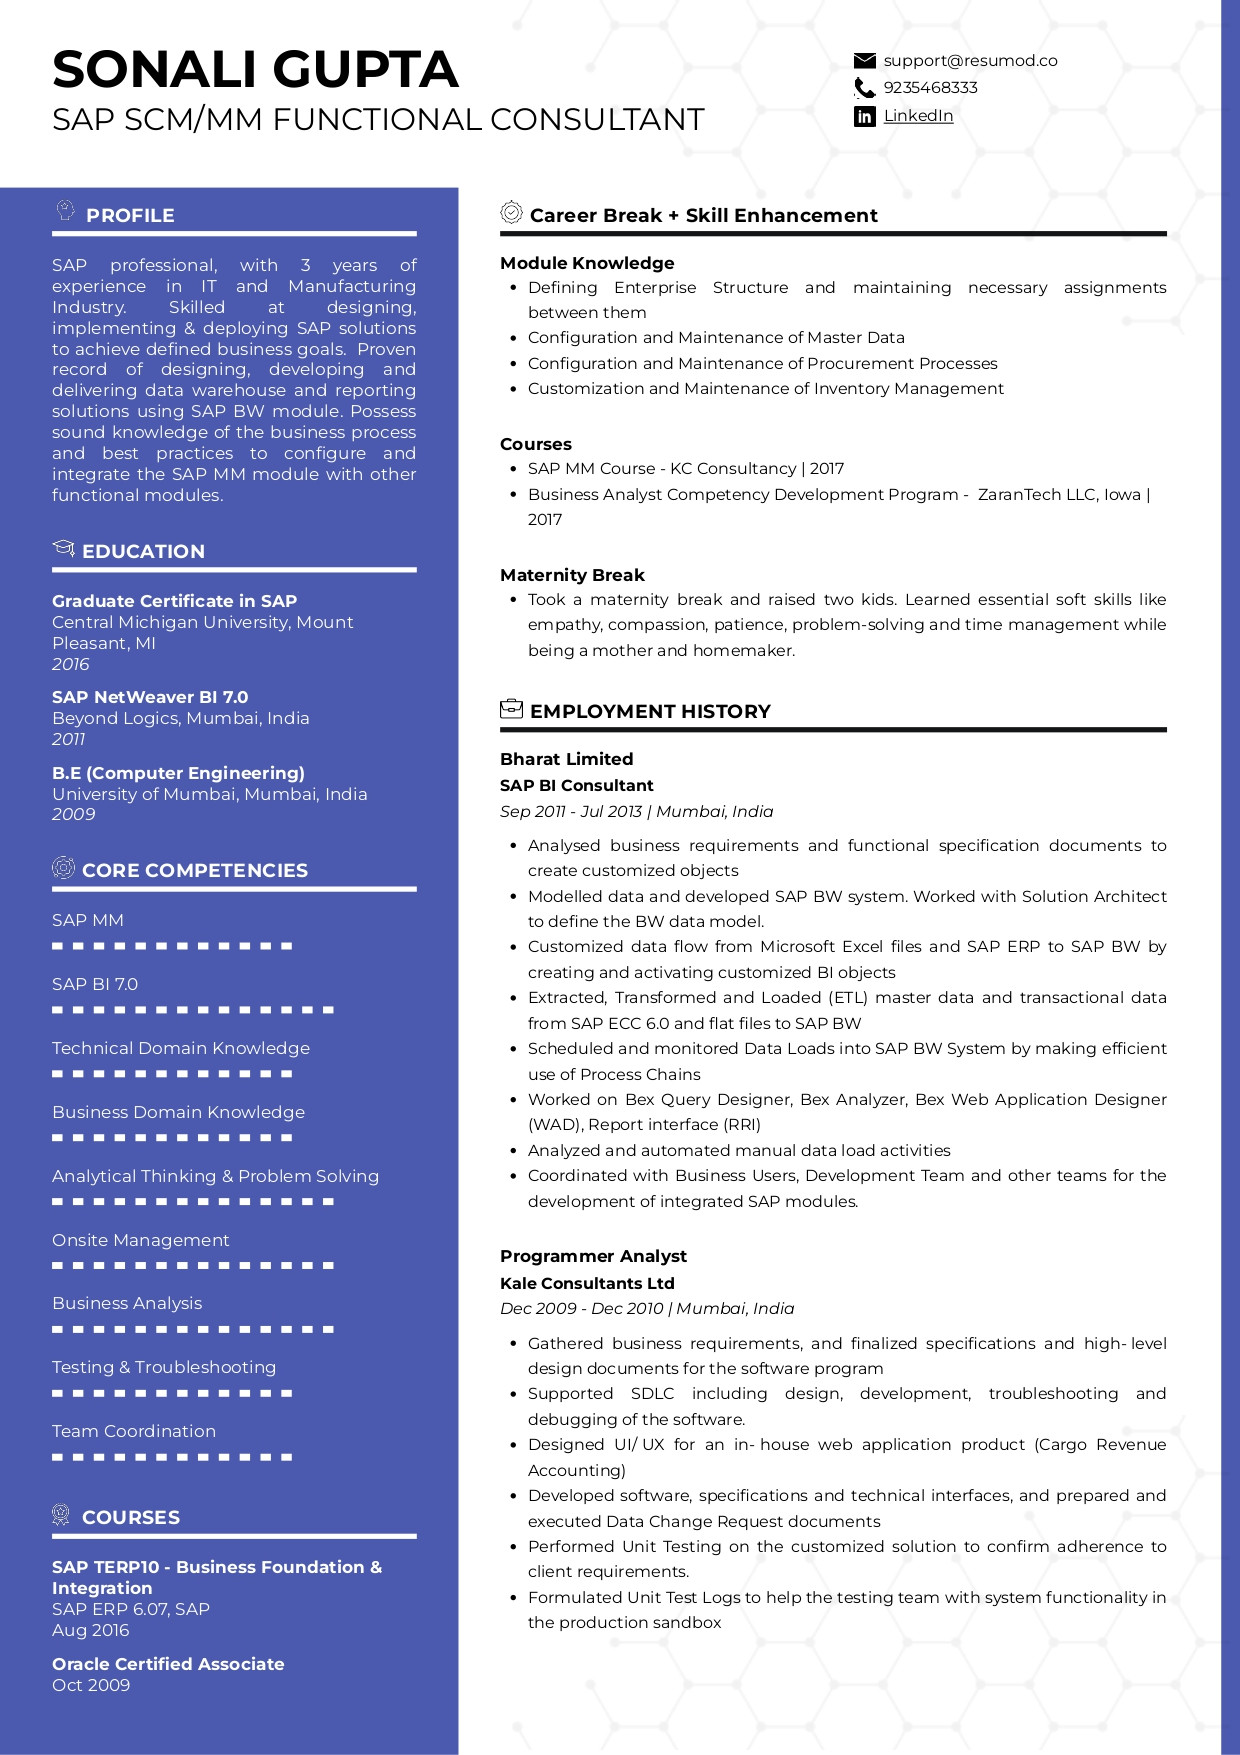 Sample Resume with Recent Career Break Sample Resumes and Cvs by Industry Resumod